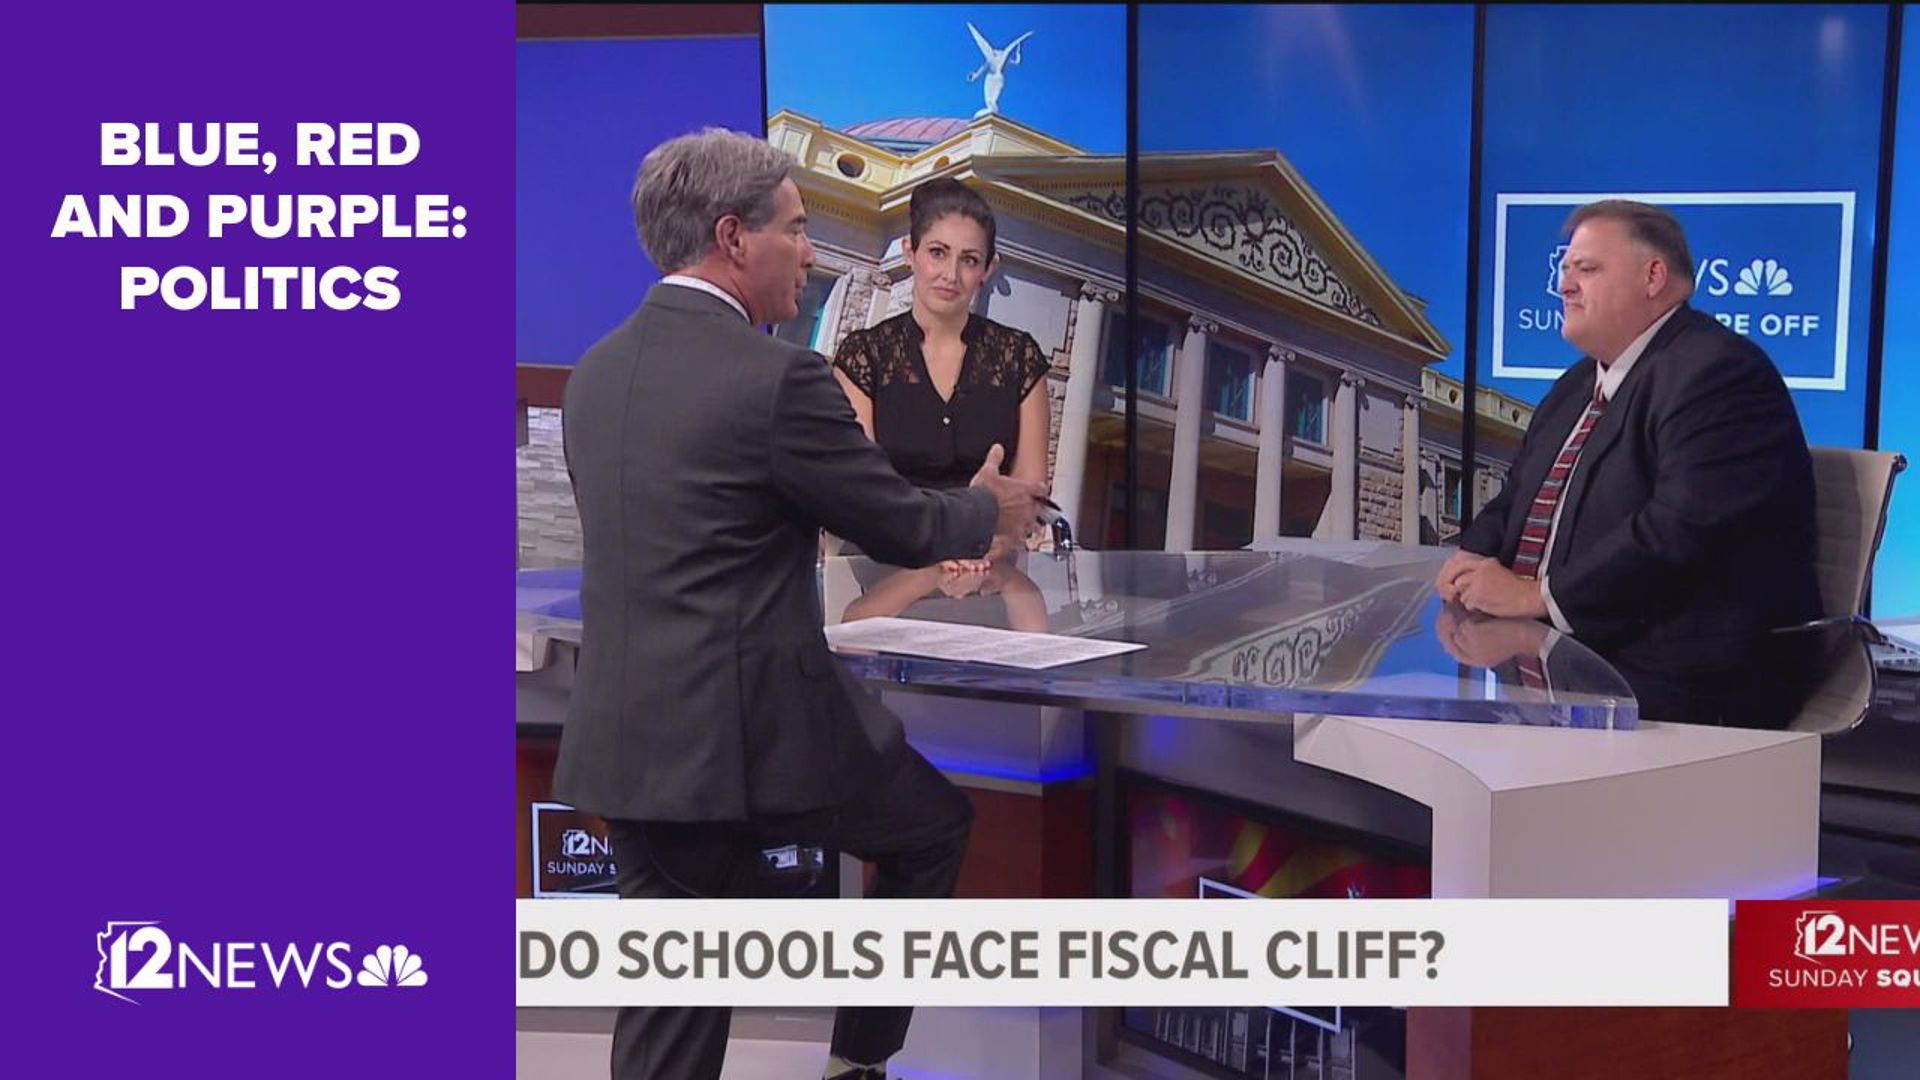 "Sunday Square Off" political insiders Dawn Penich-Thacker and Tyler Montague discuss issues surrounding Arizona schools.